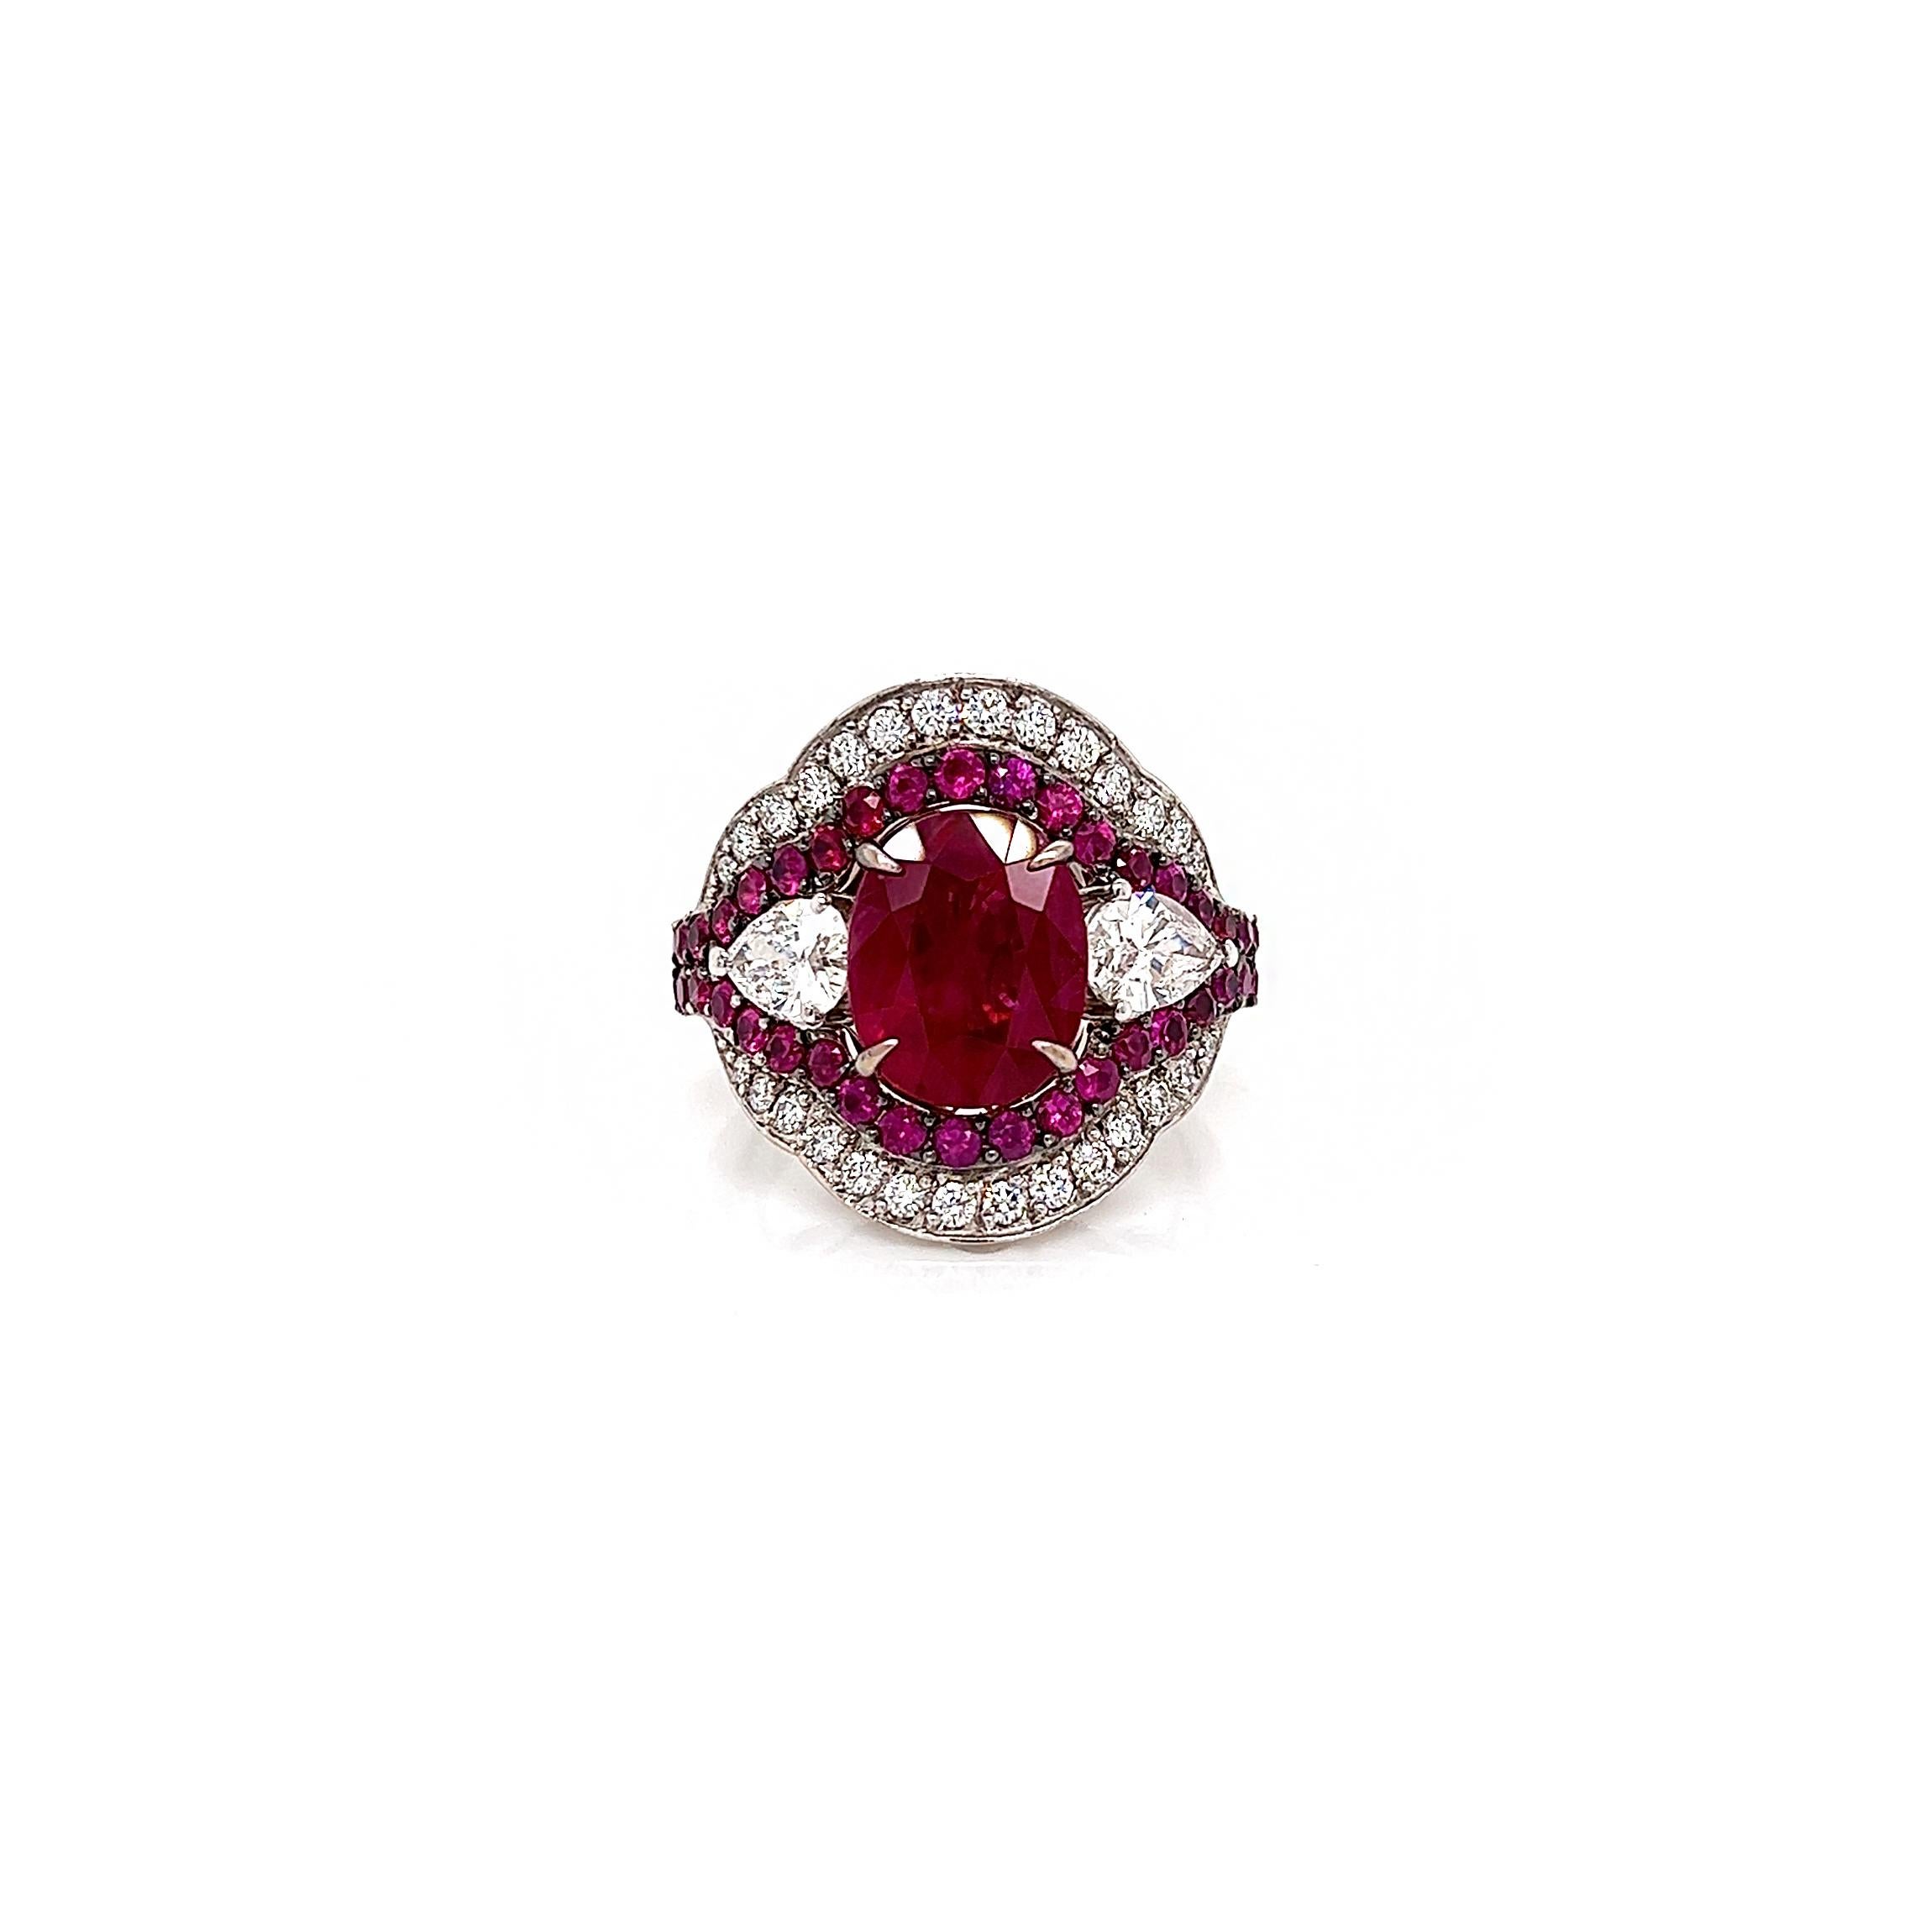 6.37 Total Carat Ruby and Diamond Ladies Ring. GIA Certified.

-Metal Type: 18K White Gold
-3.62 Carat Oval Cut Natural Ruby, GIA Certified 
-Ruby Measurements: 11.42 x 9.24 x 4.23 mm
-The color appearance of this stone is described as 